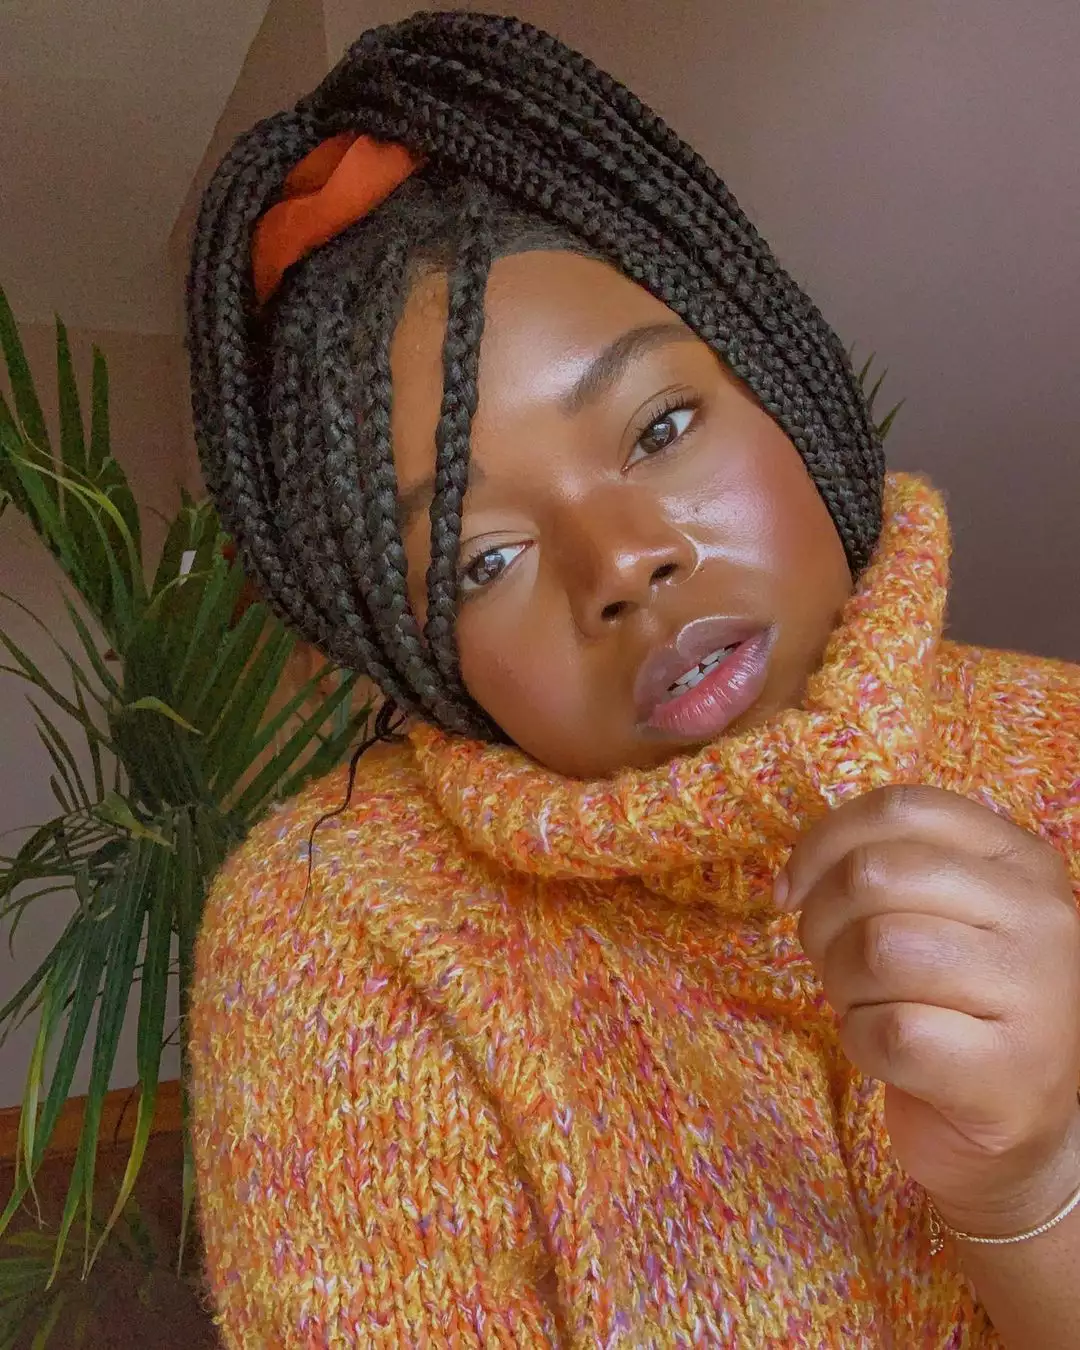 woman with no-makeup makeup in an orange turtleneck and braids